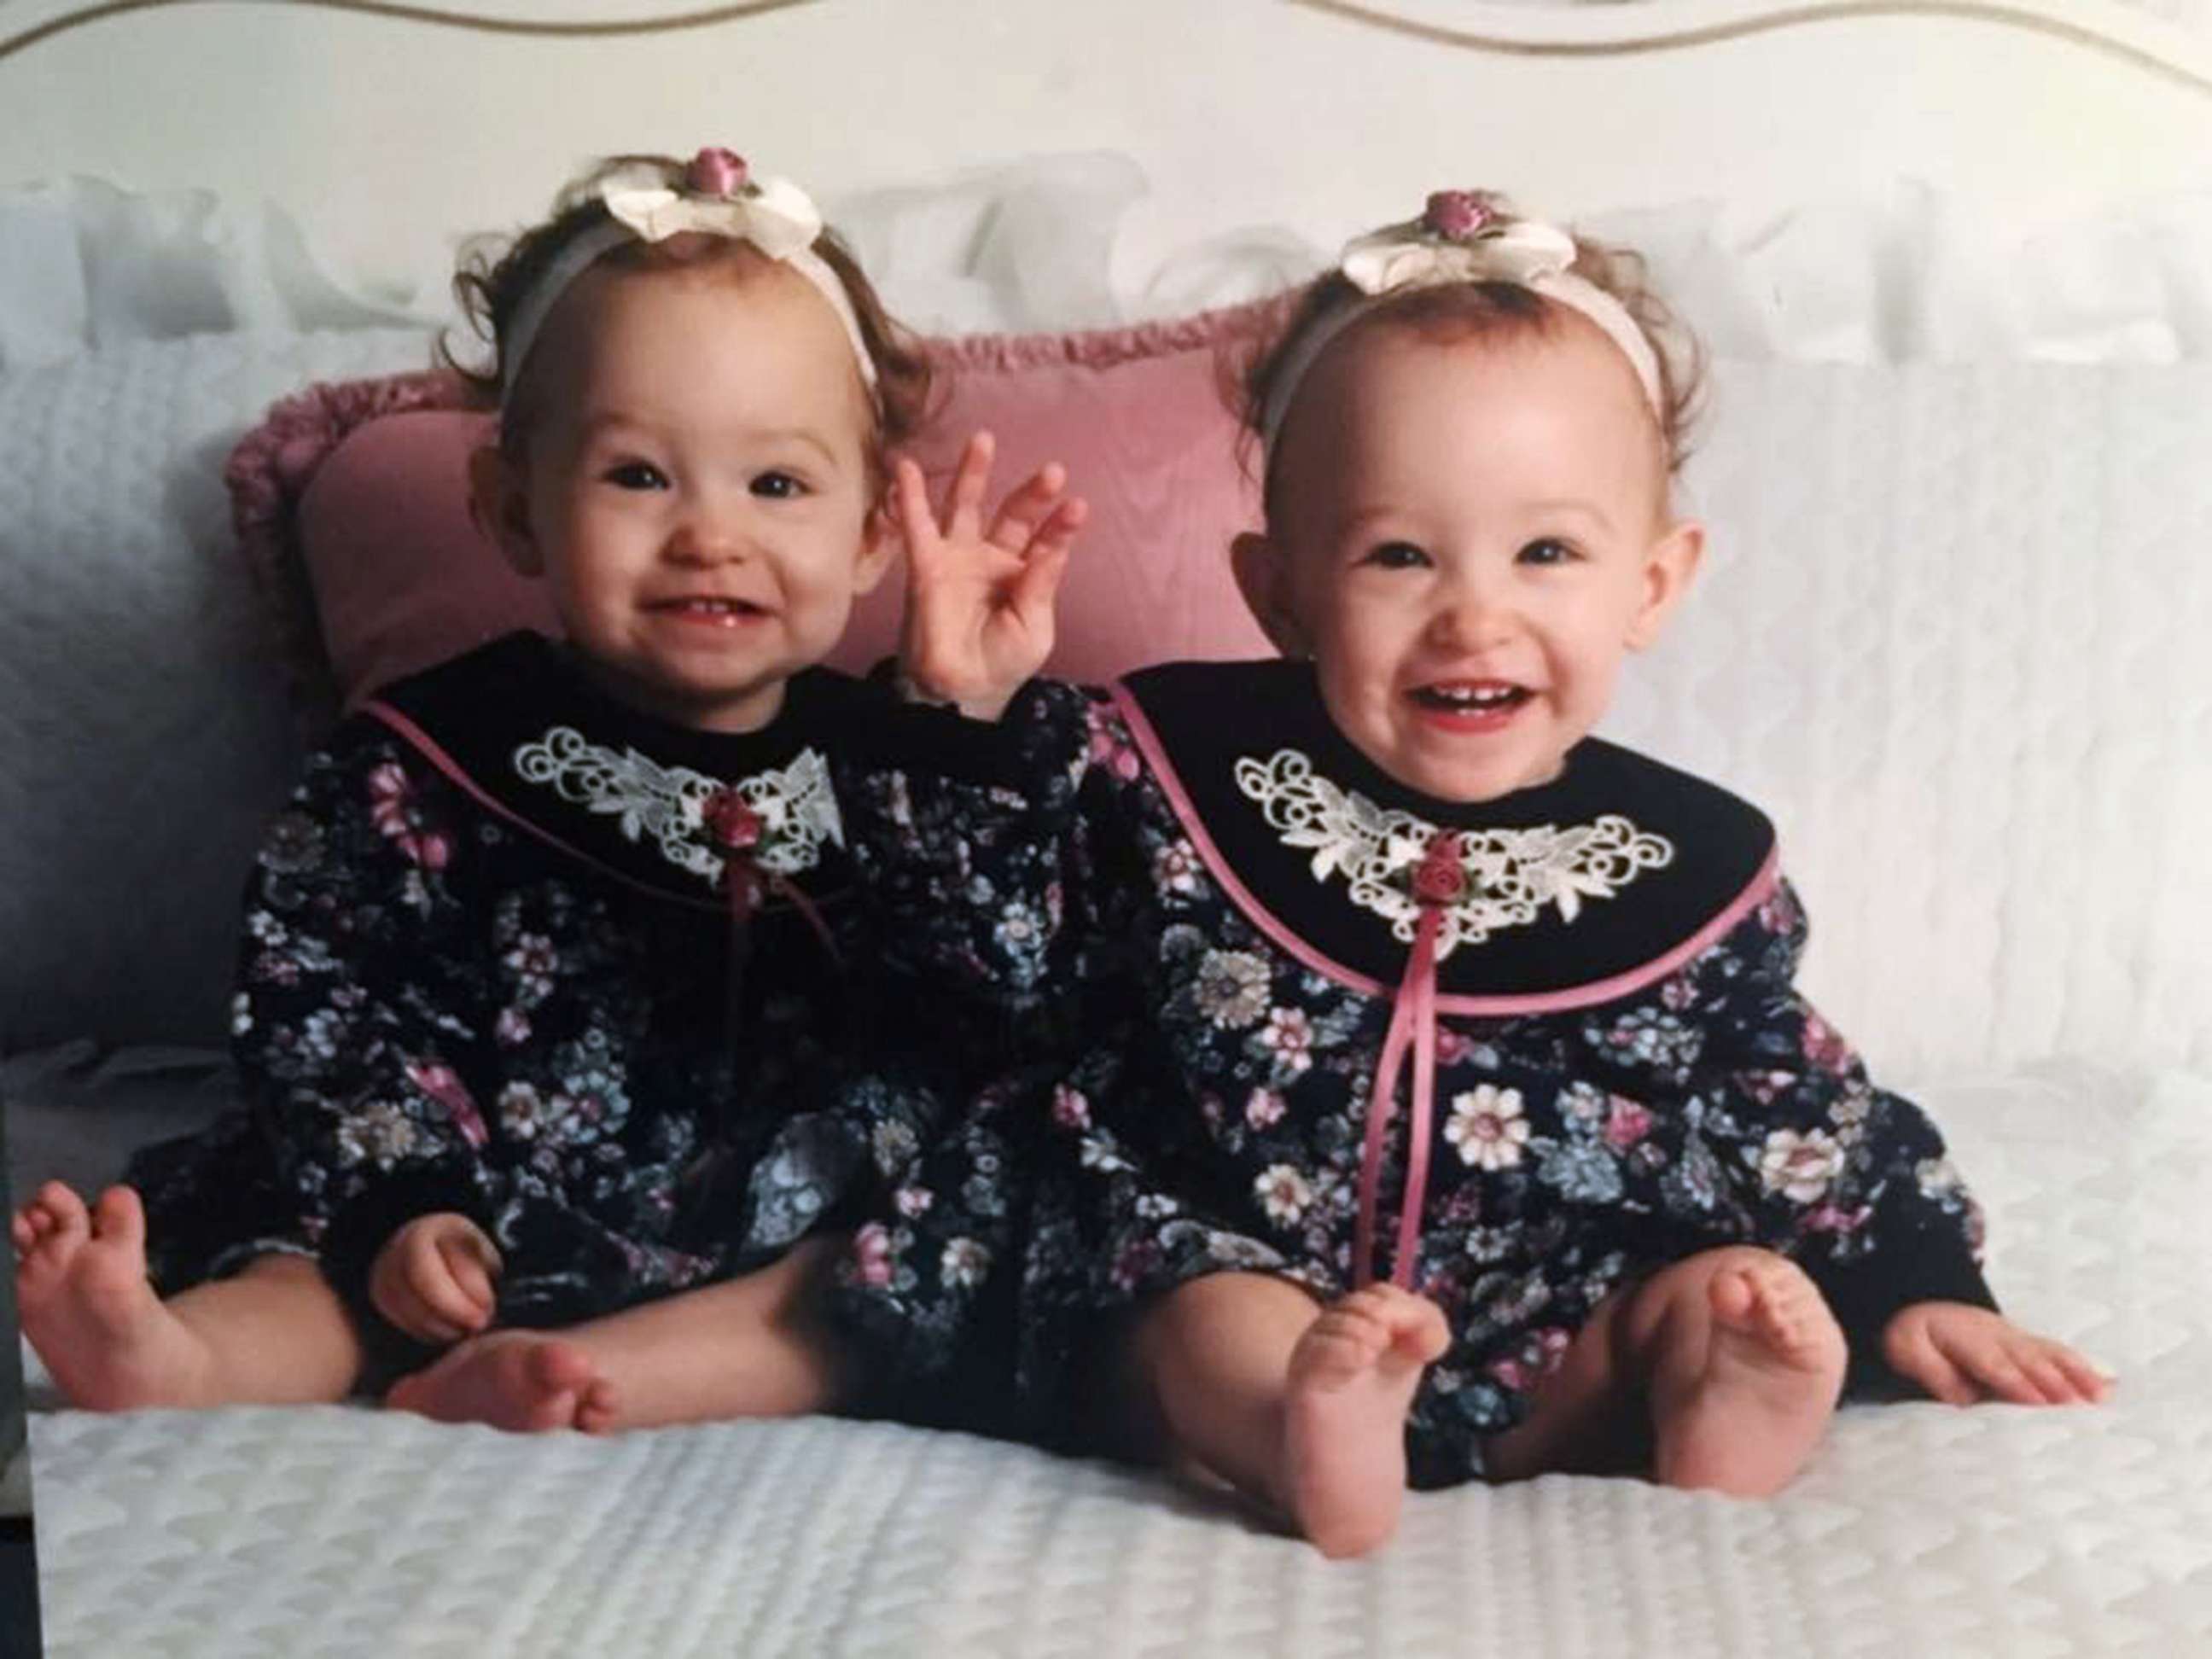 PHOTO: Alex and Jaci Hermstad are pictured at approximately 1-year-old, circa 1994.